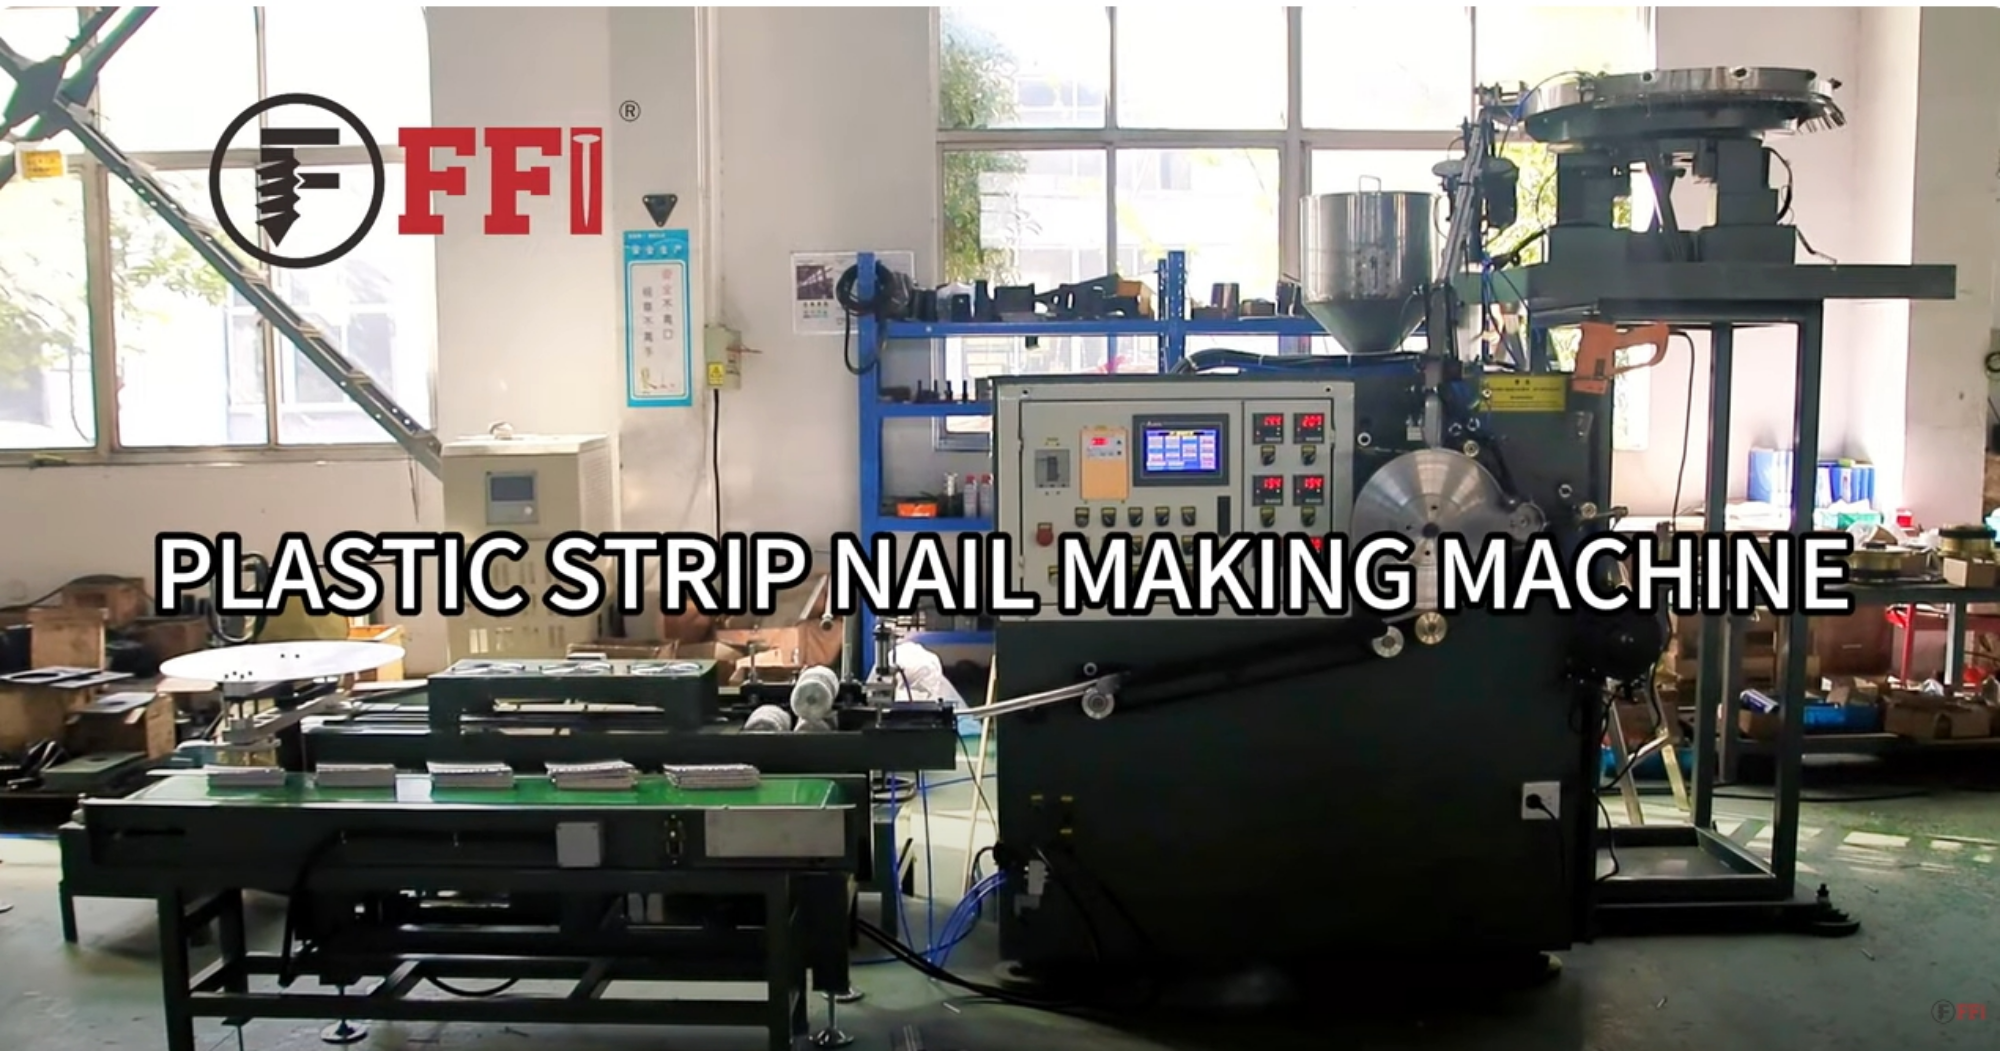 How does the plastic nailing machine work?